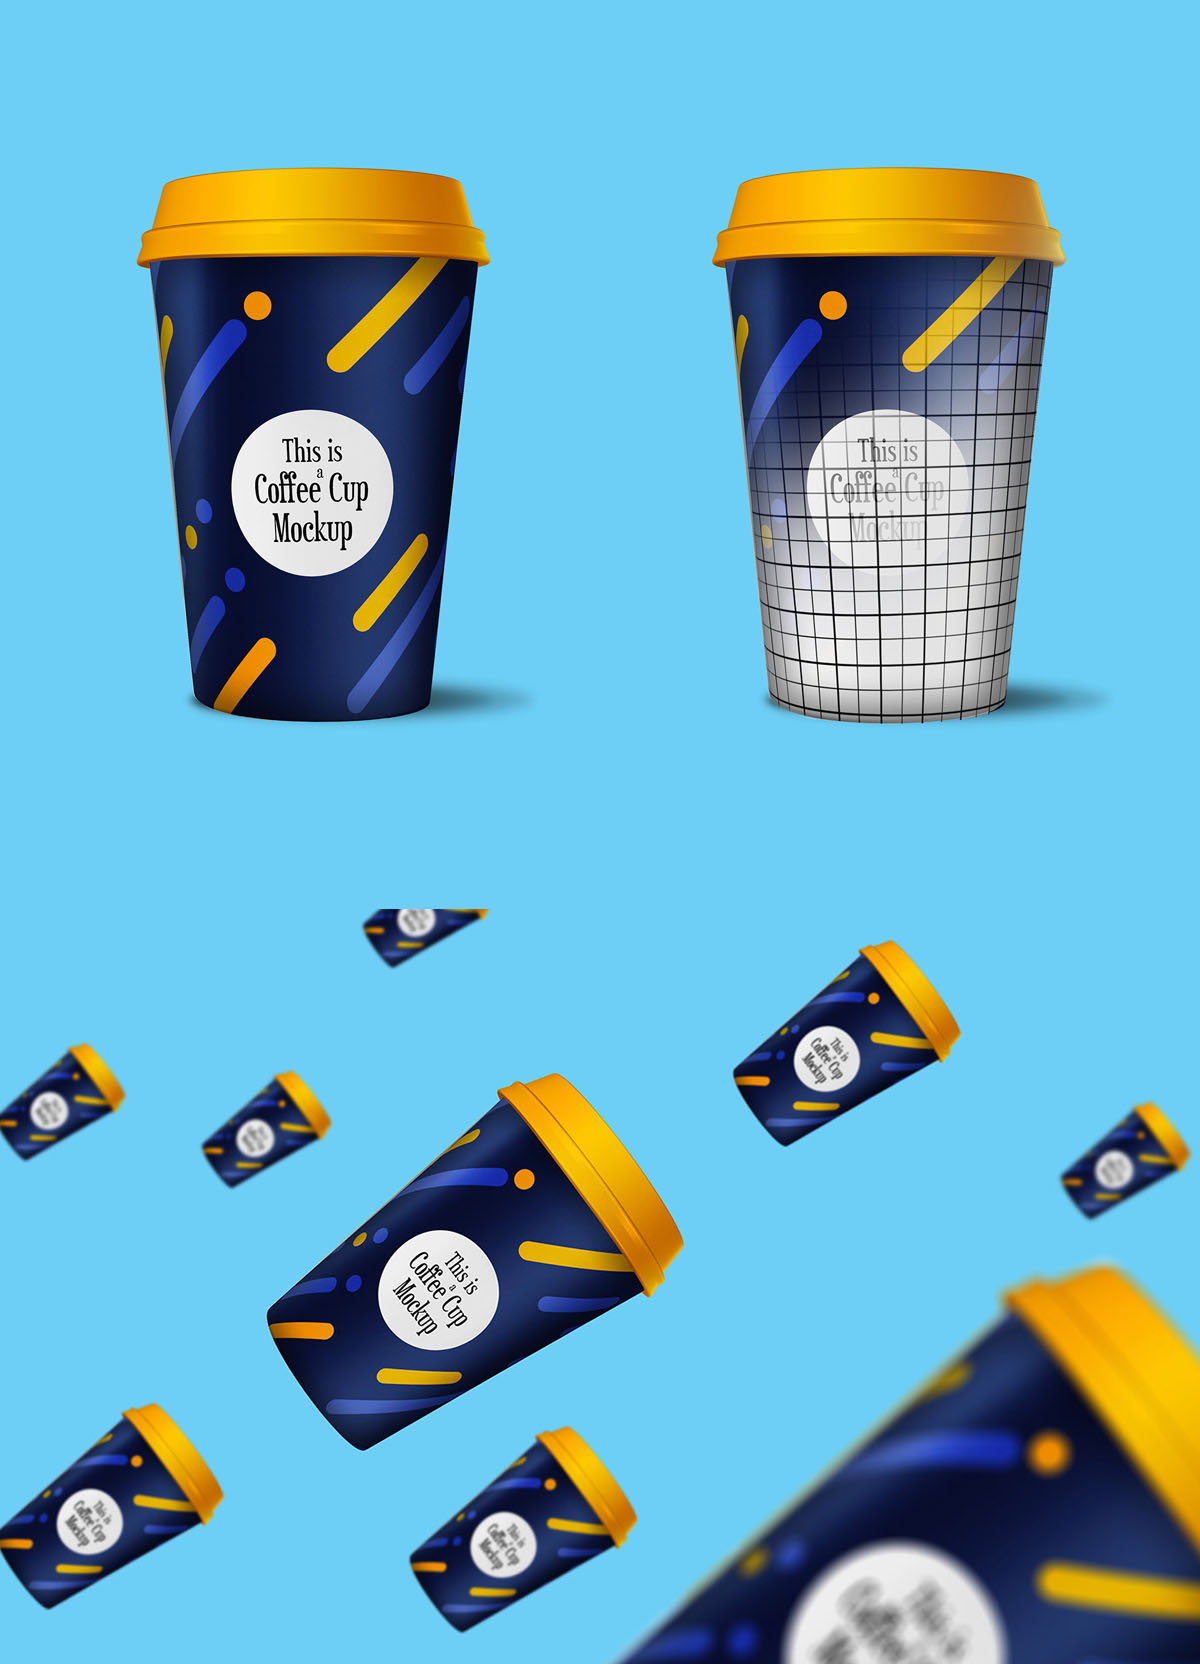 Download Free Coffee Cup Mockup PSD - Find the Perfect Creative ...